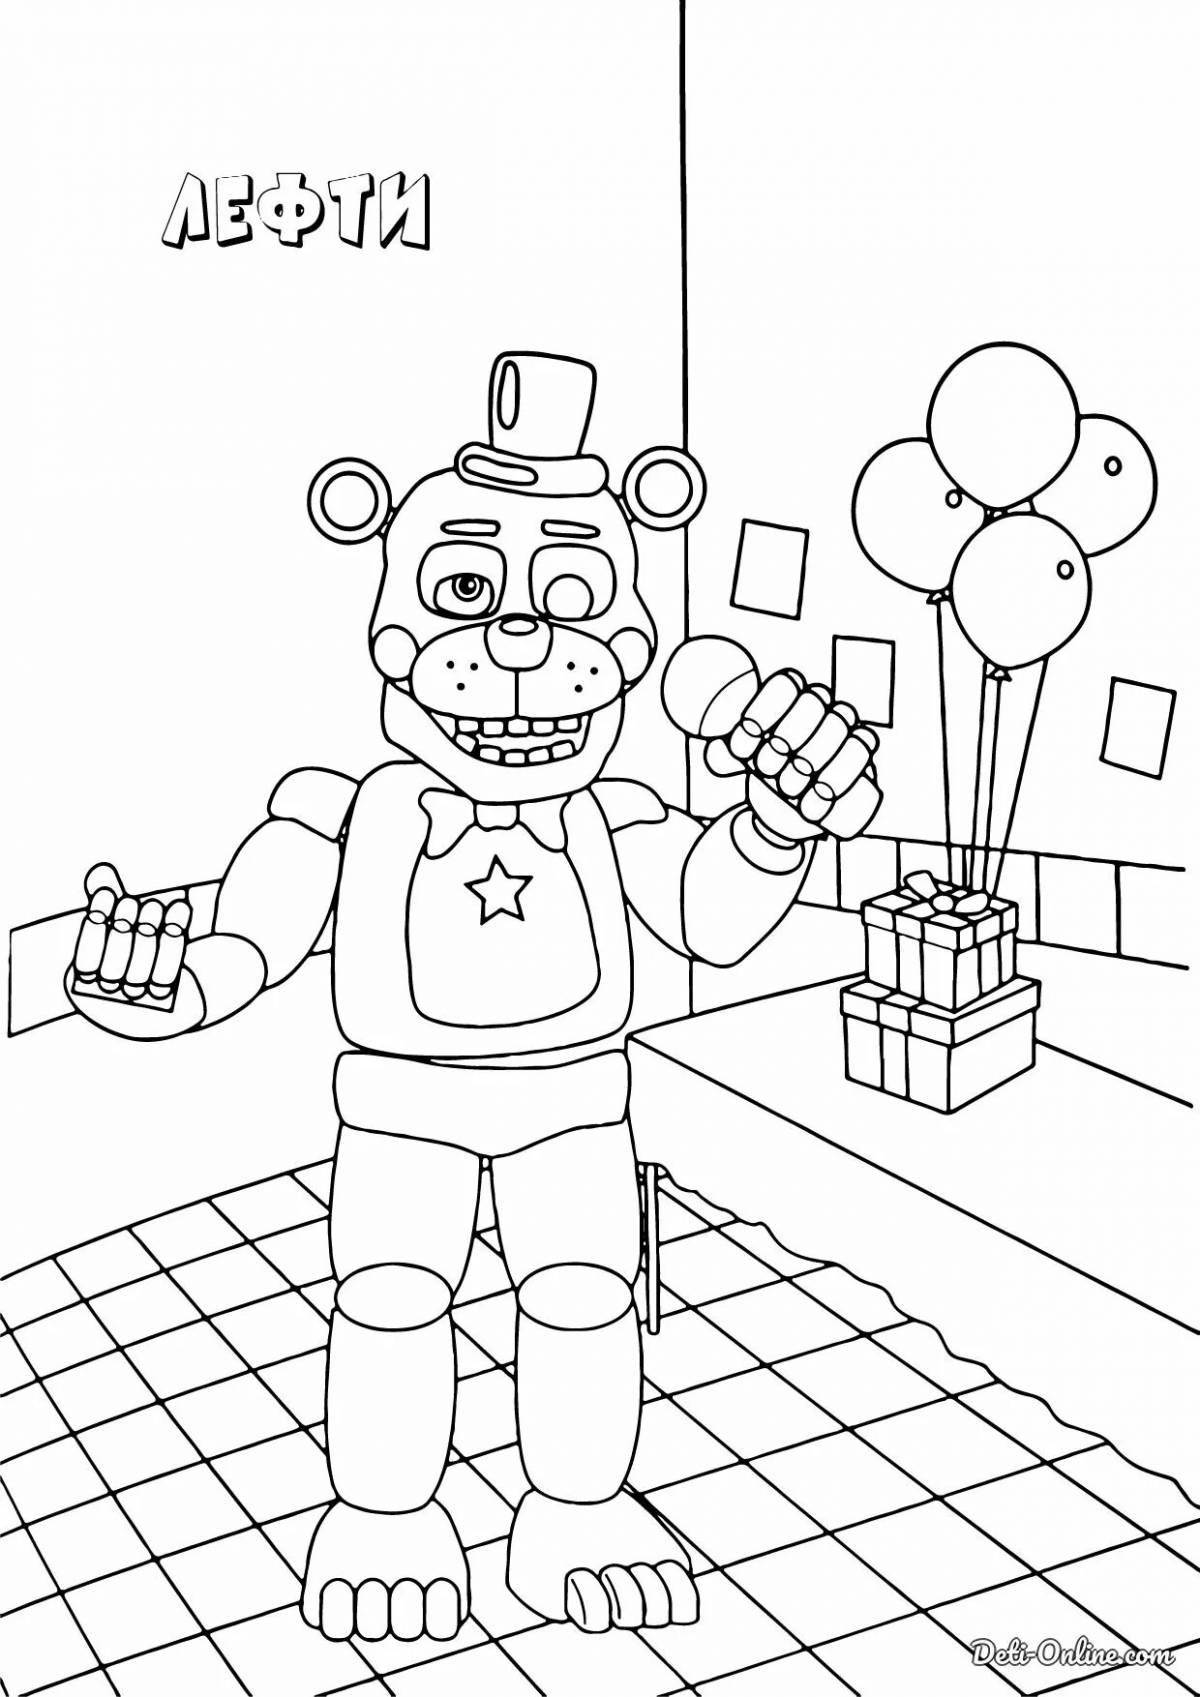 Exquisite left handed animatronic coloring book